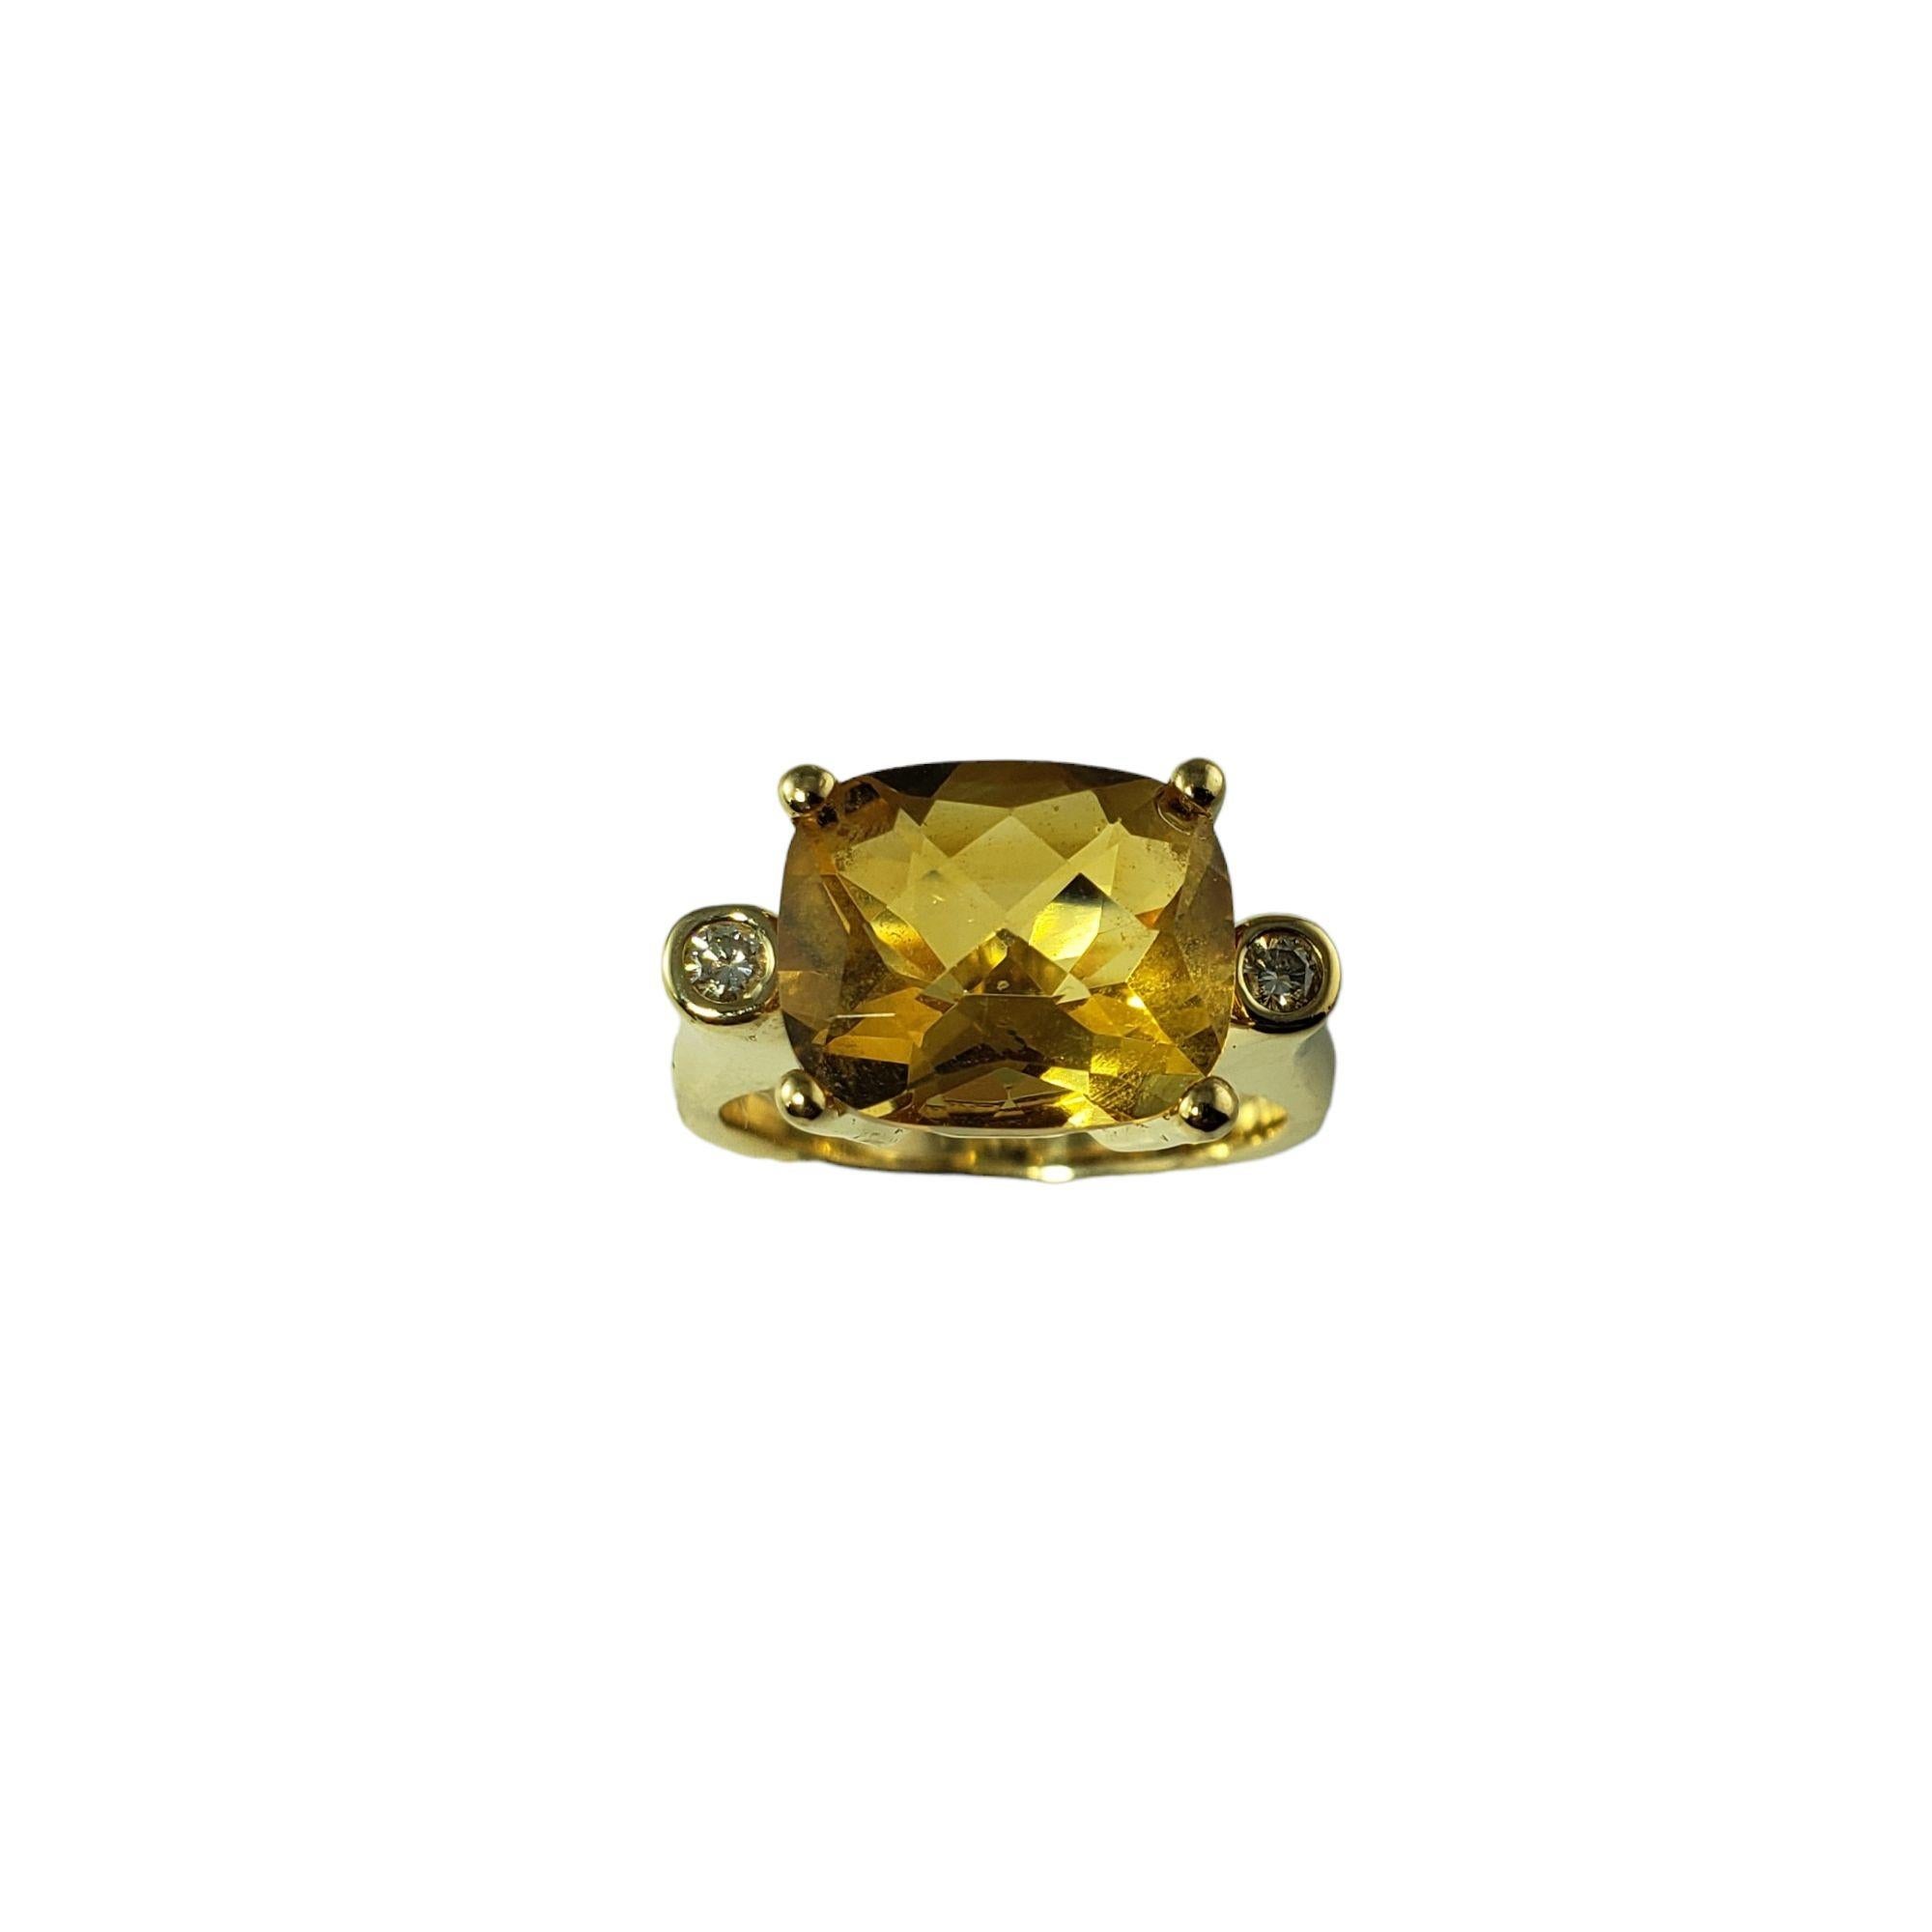 Vintage 14 Karat Yellow Gold Citrine and Diamond Ring Size 7-

This elegant ring features one oval east/west set citrine stone (12 mm x 10 mm) and two round brilliant cut diamonds set in classic 14K yellow gold.  Shank:  3 mm.

Topaz weight:  5.39